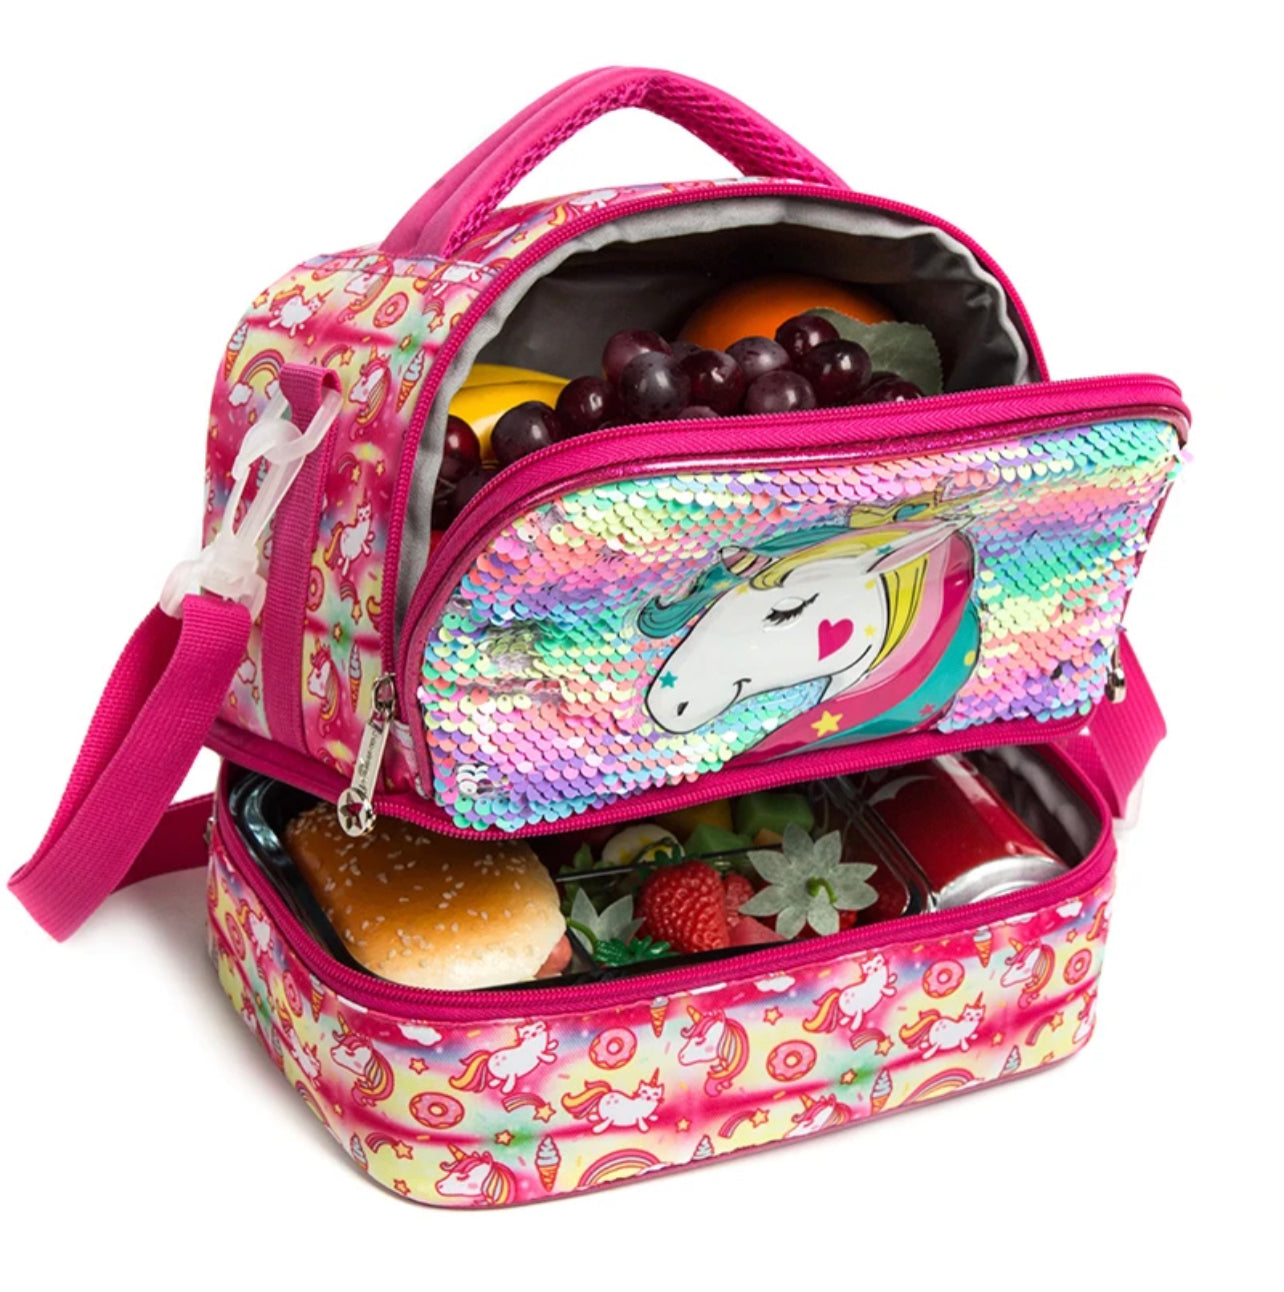 Luxury Insulated Lunch Bag - Two Big Compartments